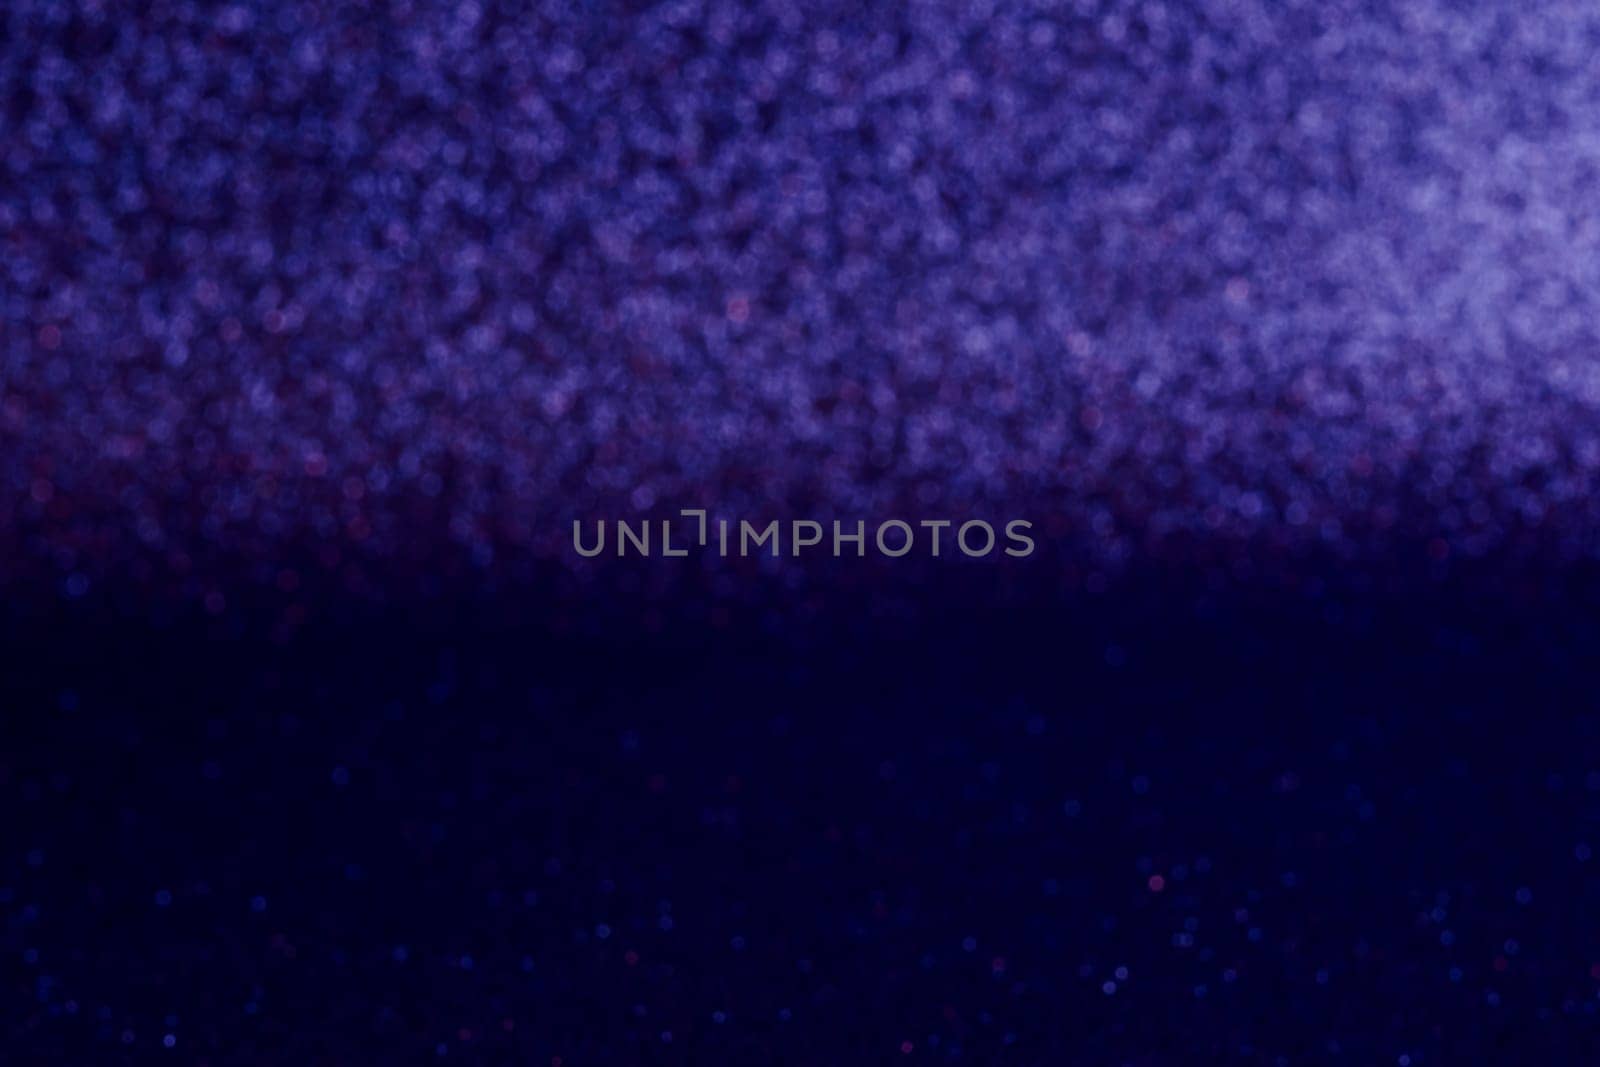 A blurry image of a blue background with purple and red dots by Alla_Morozova93